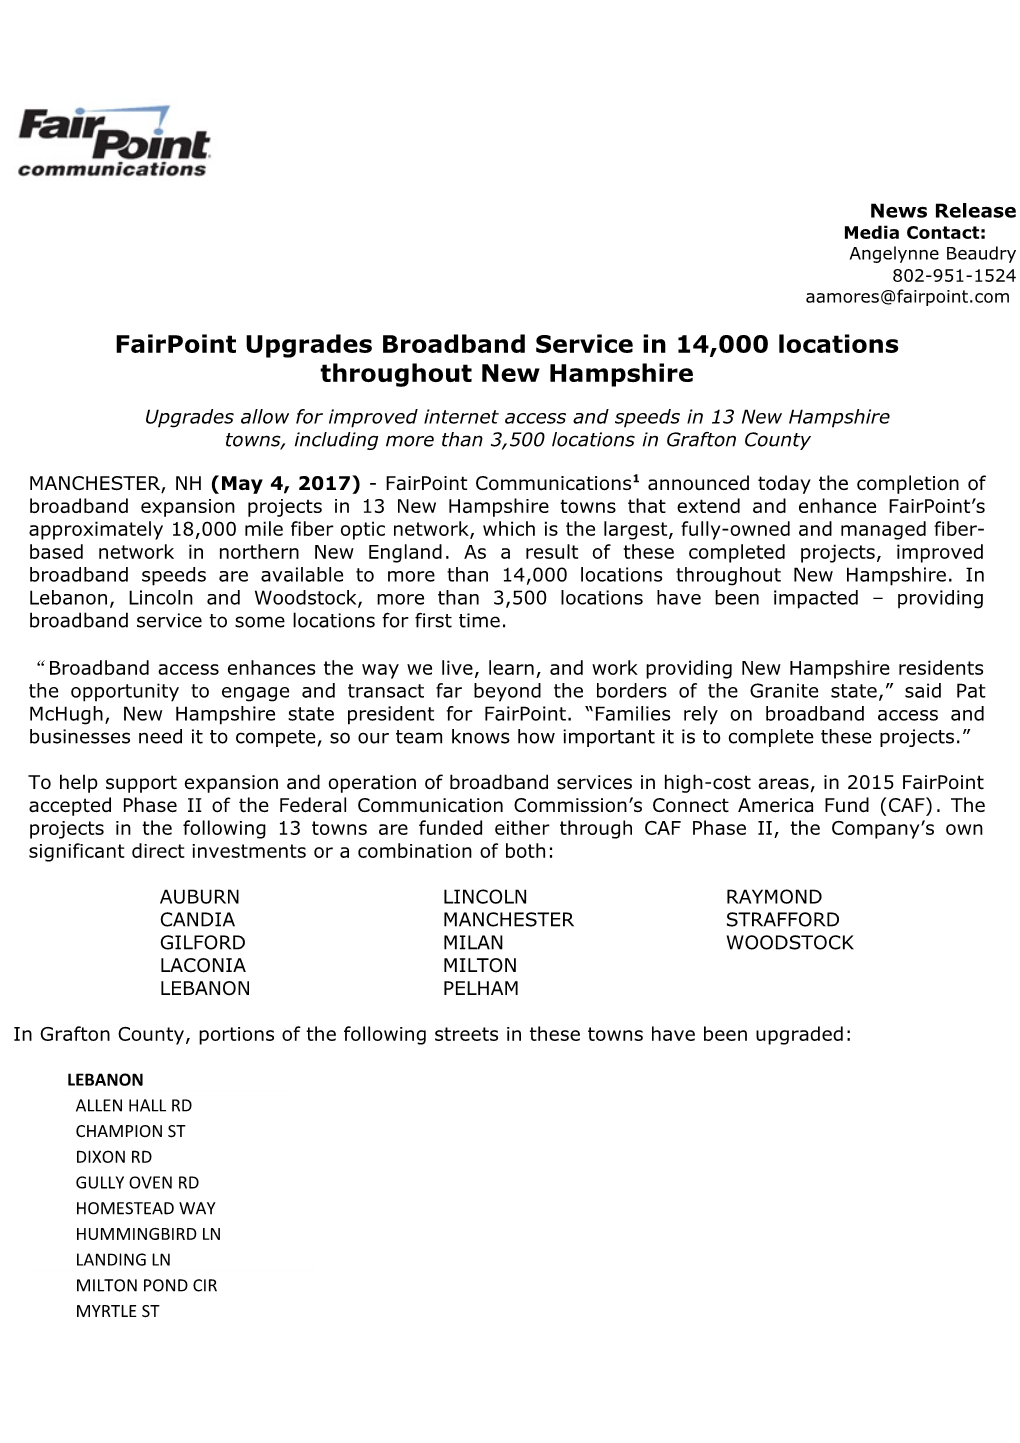 Fairpoint Upgrades Broadband Service in 14,000 Locations Throughout New Hampshire